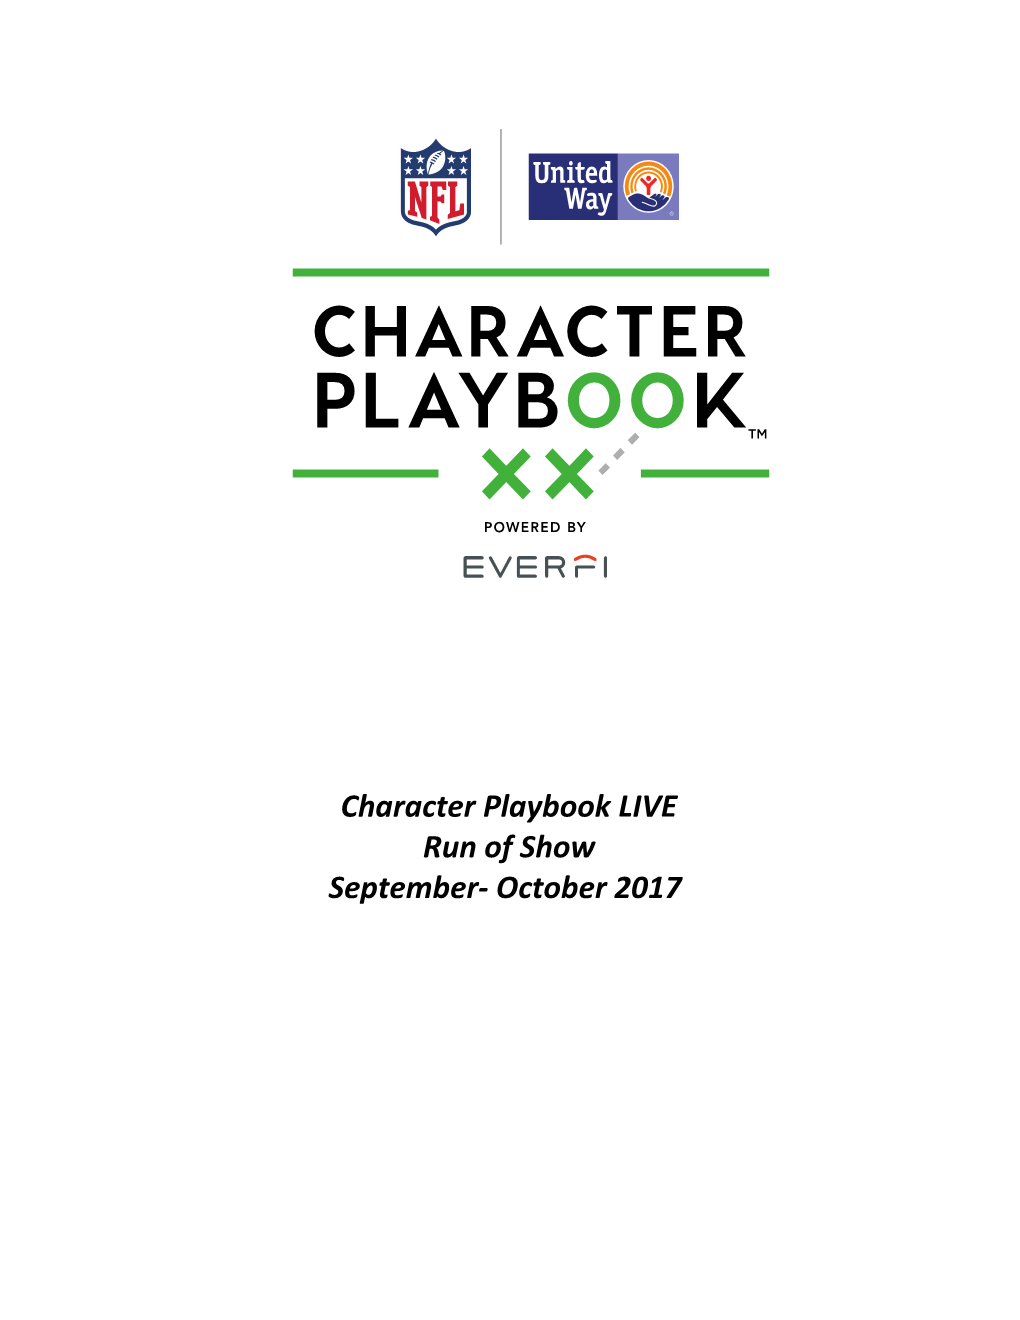 Character Playbook LIVE